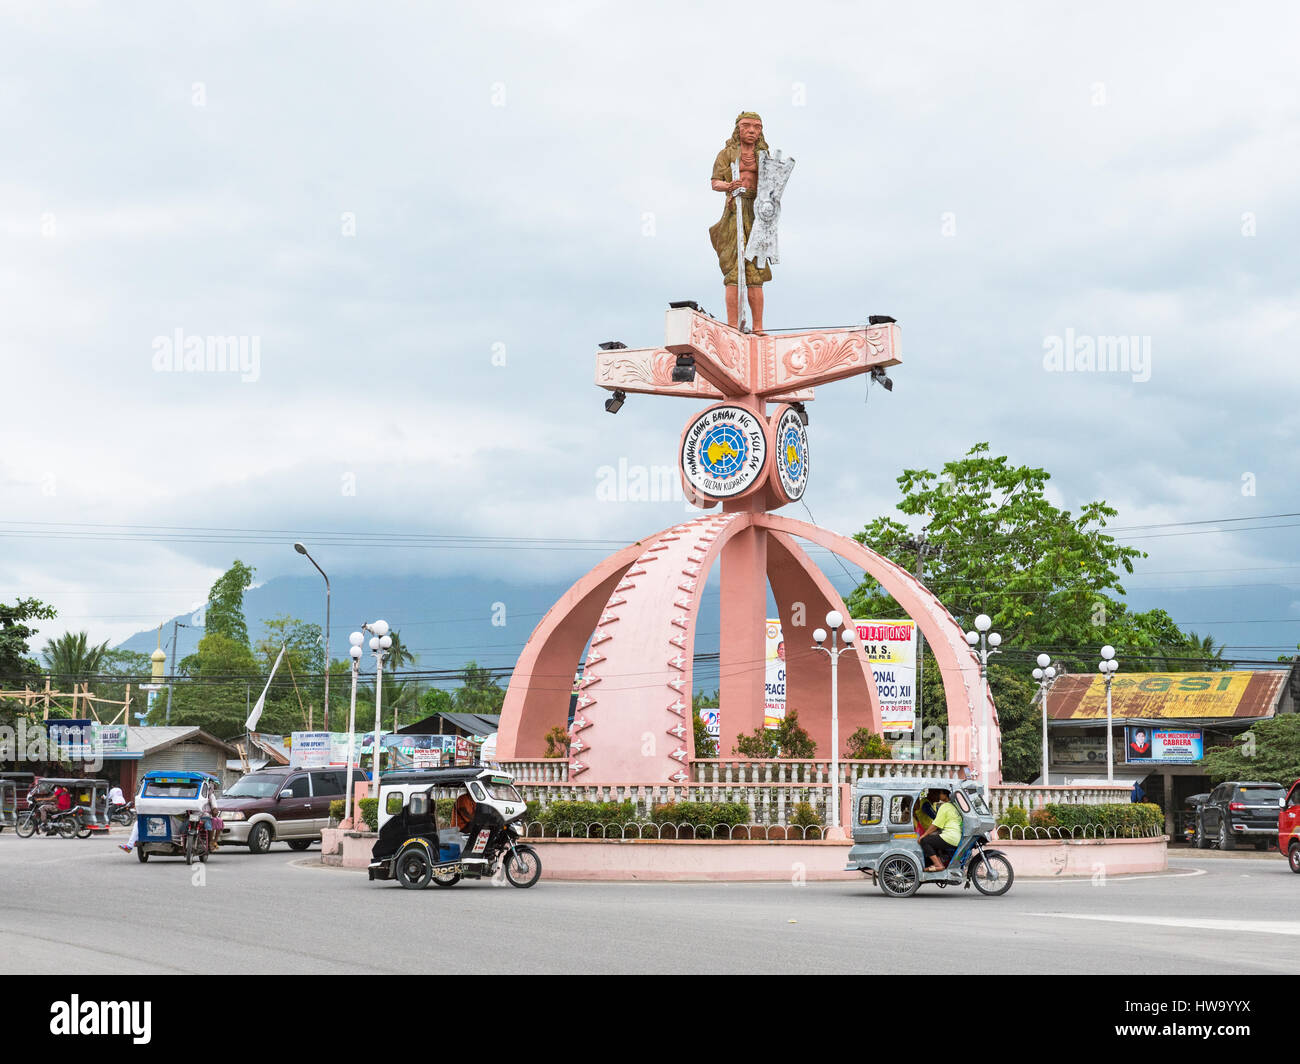 The Sultan Kudarat monument in Isulan, the capitol of the Sultan Kudarat province, The Philippines. Stock Photo